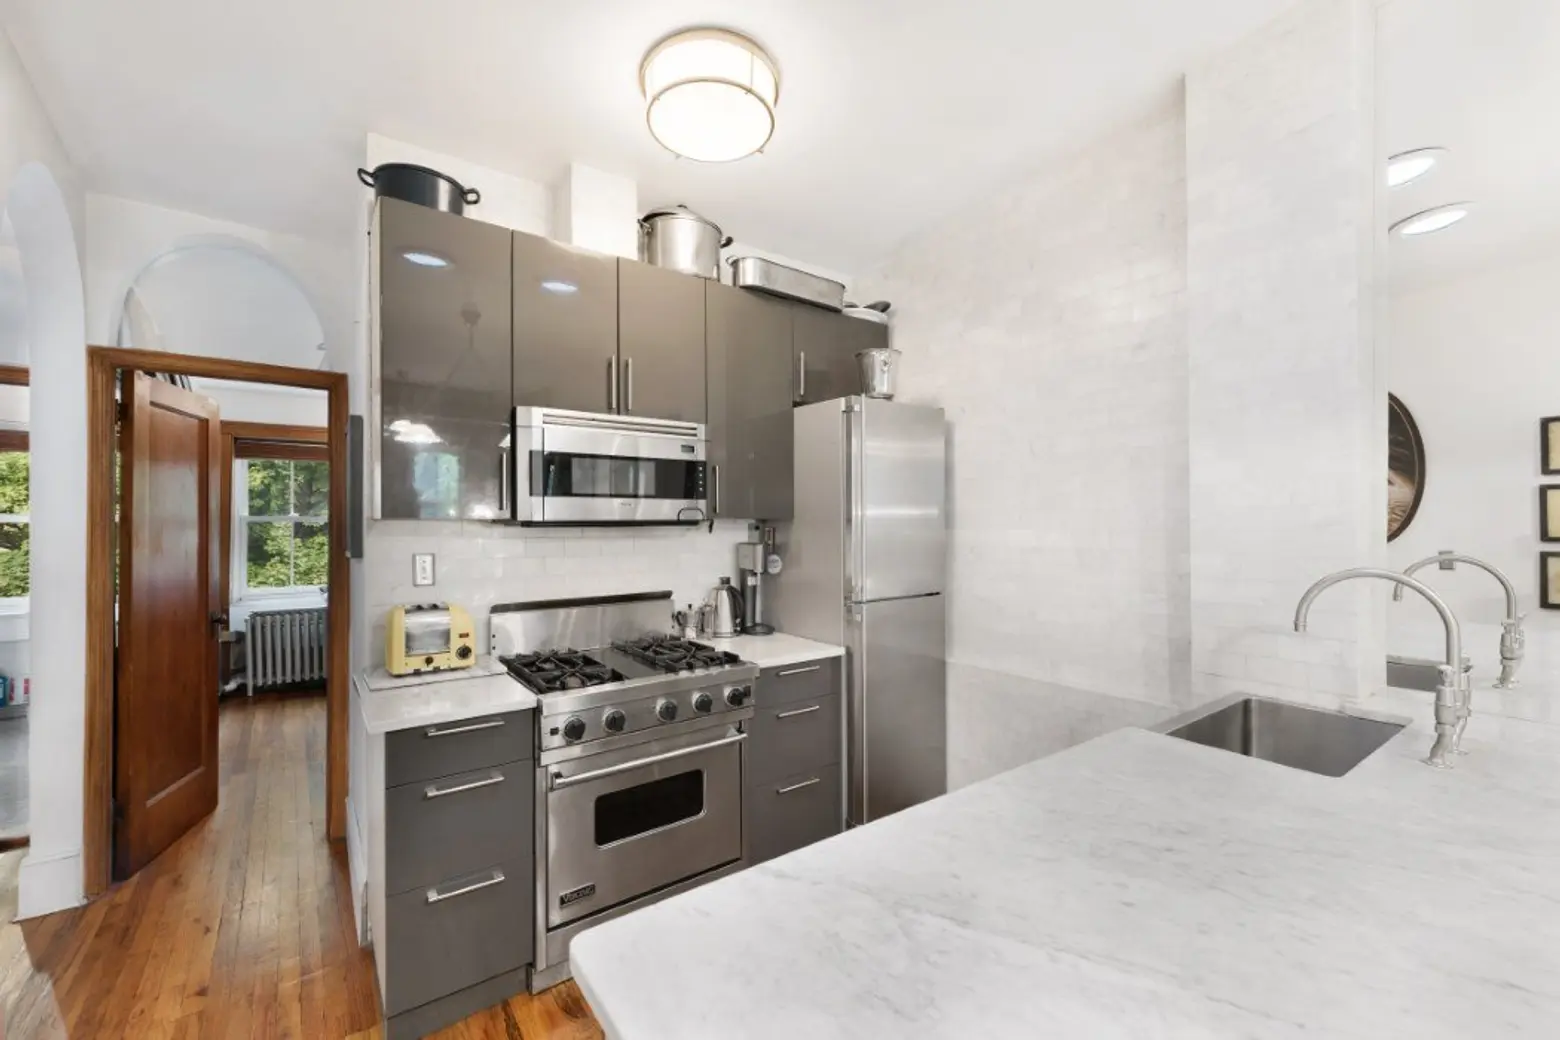 247 east 49th street, rental, sotheby's, kitchen 